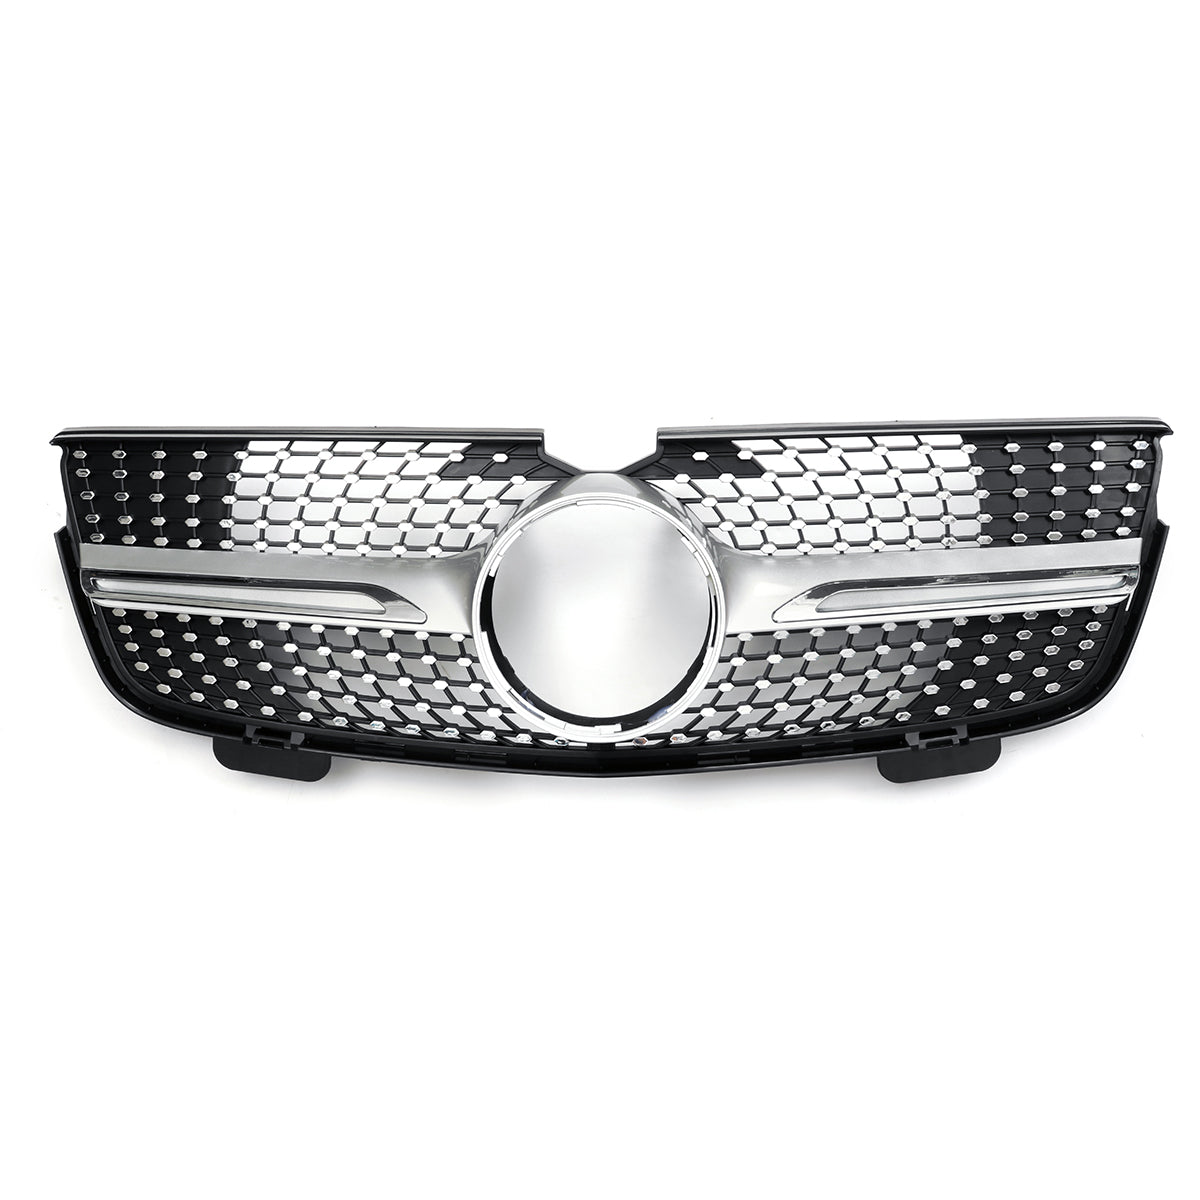 Lavender Silver Diamond Grille Front Grill For Mercedes-Benz X164 GL-Class GL450 GL350 GL320